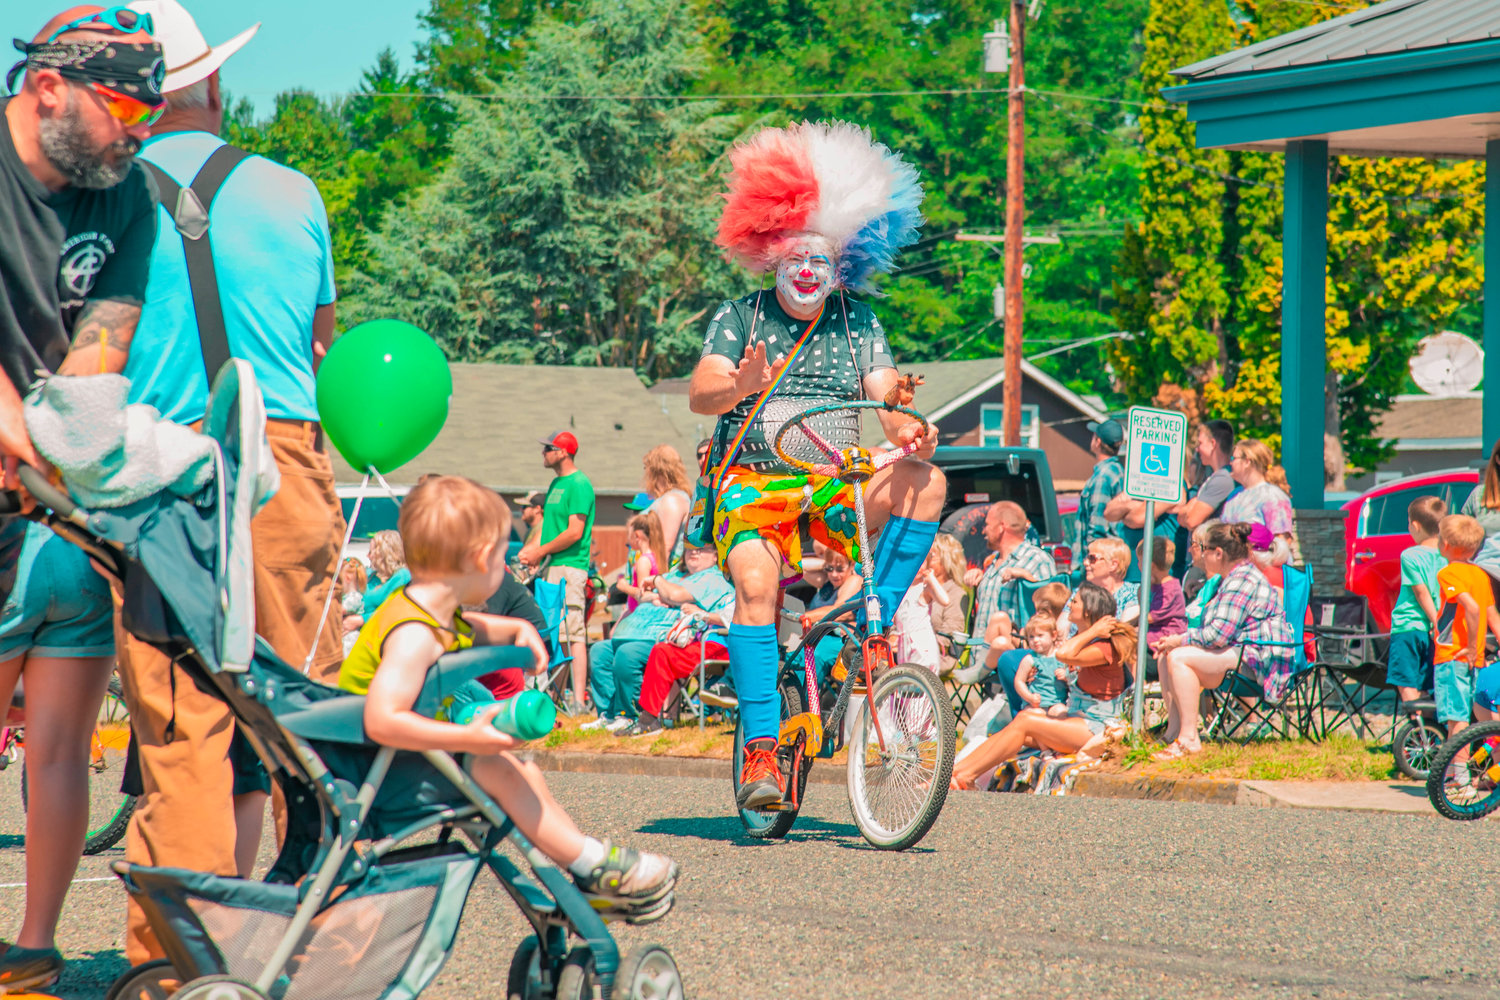 An Astoria Clown waves from a bike during the Toledo Cheese Days parade Saturday in downtown Toledo.